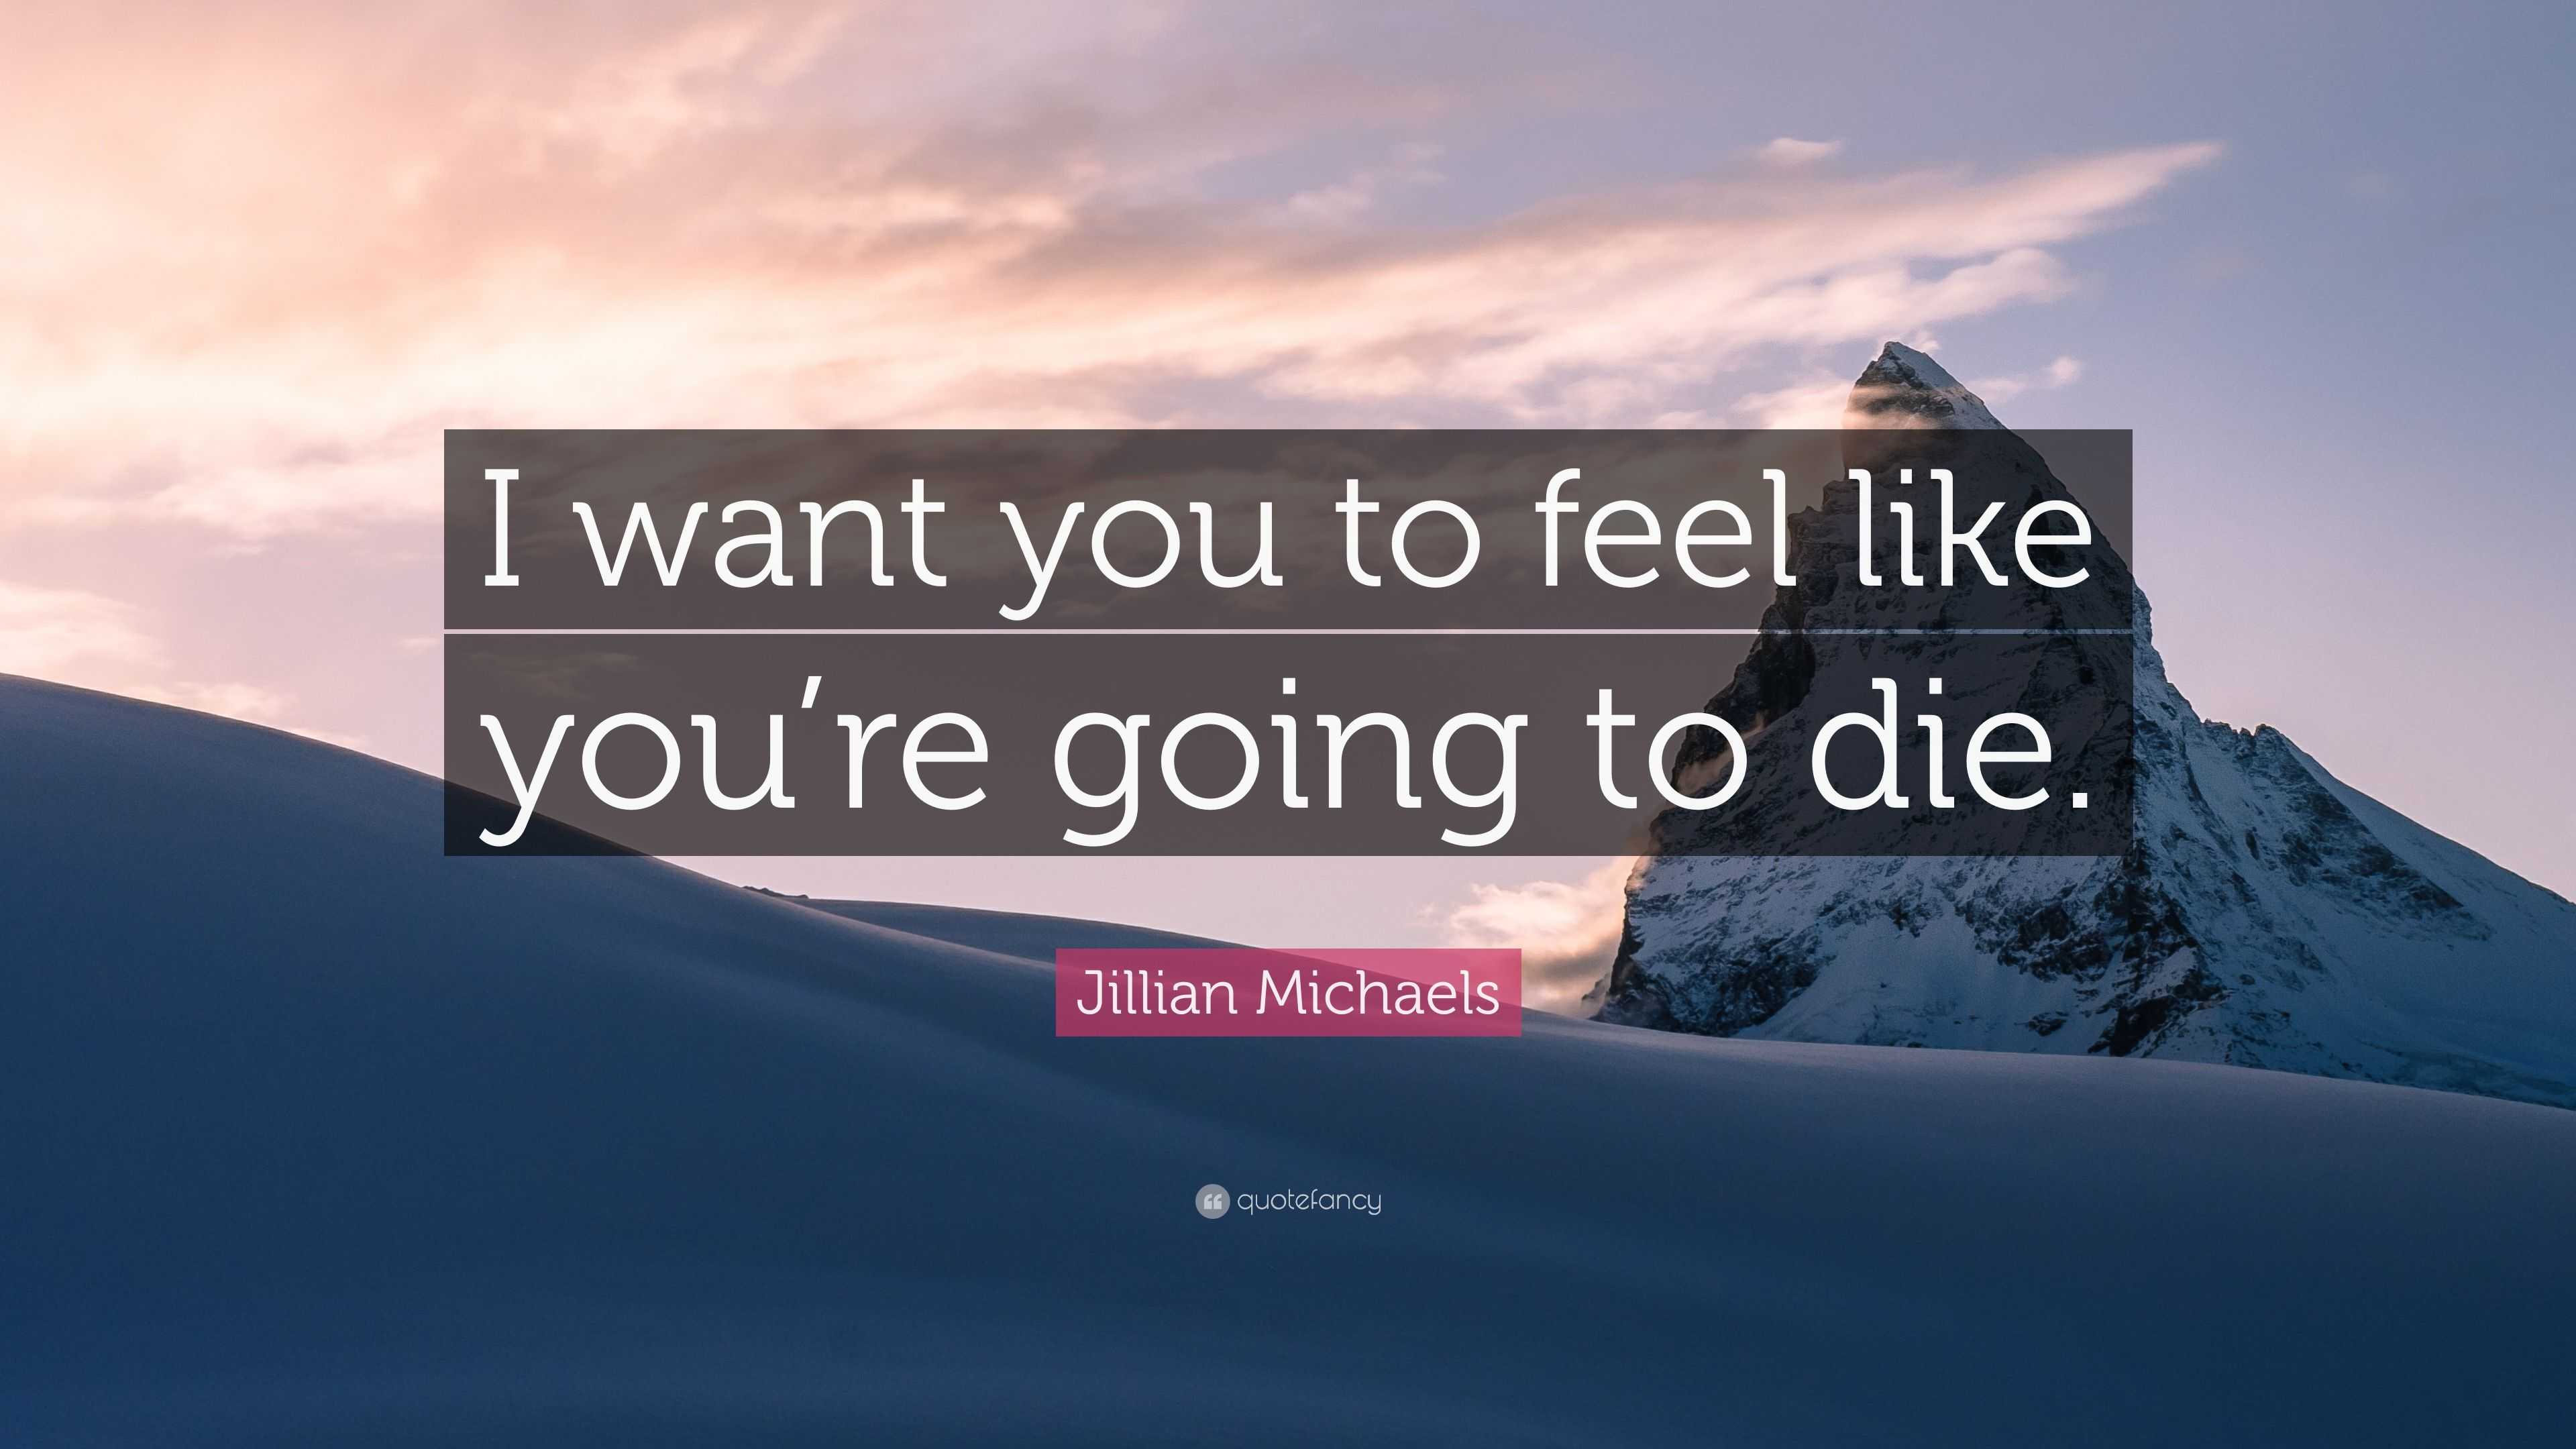 Jillian Michaels Quote: “I want you to feel like you’re going to die.”